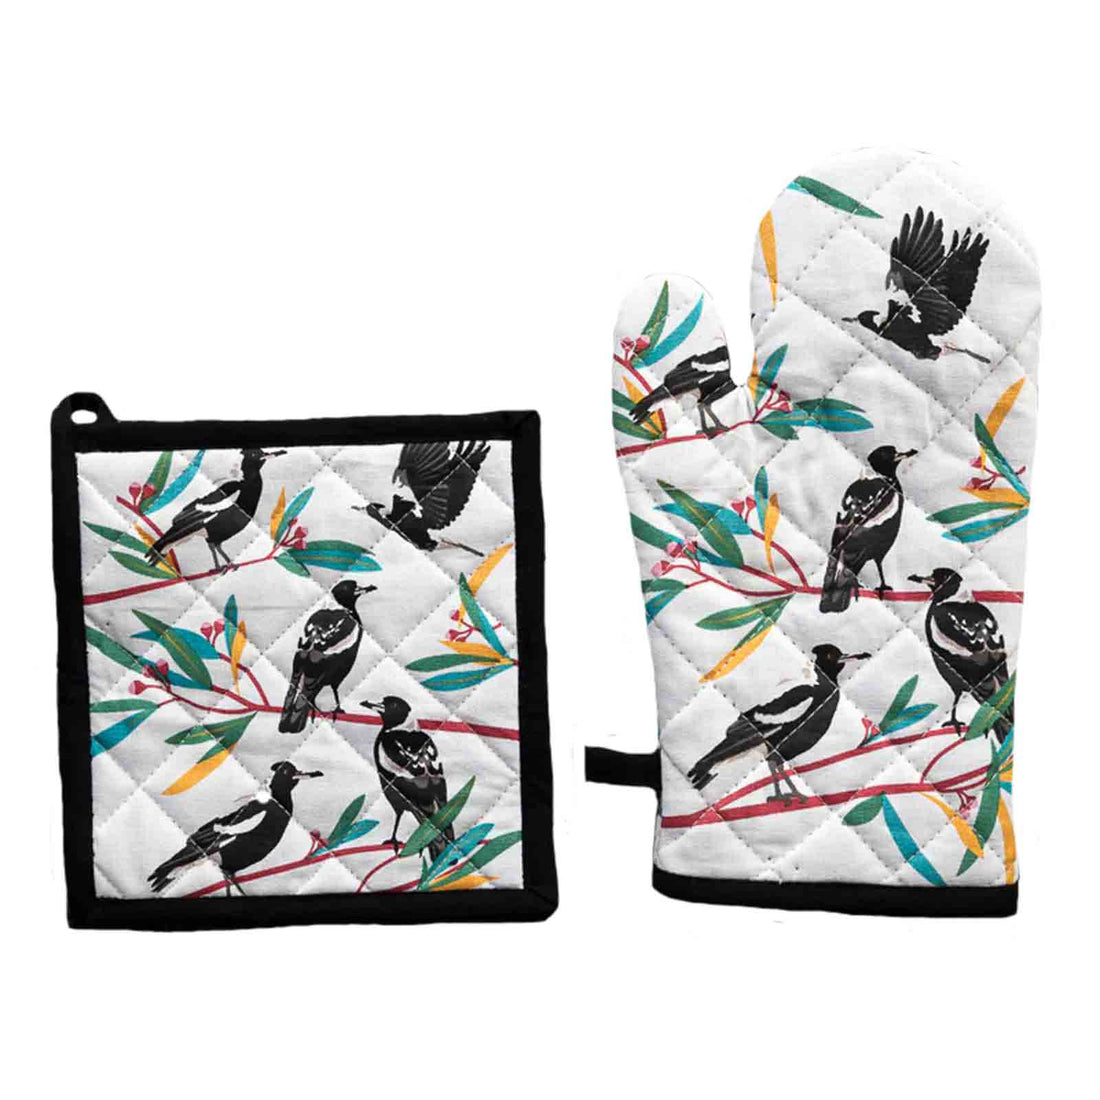 Magpies 100%  Cotton Oven Glove and Pot Holder